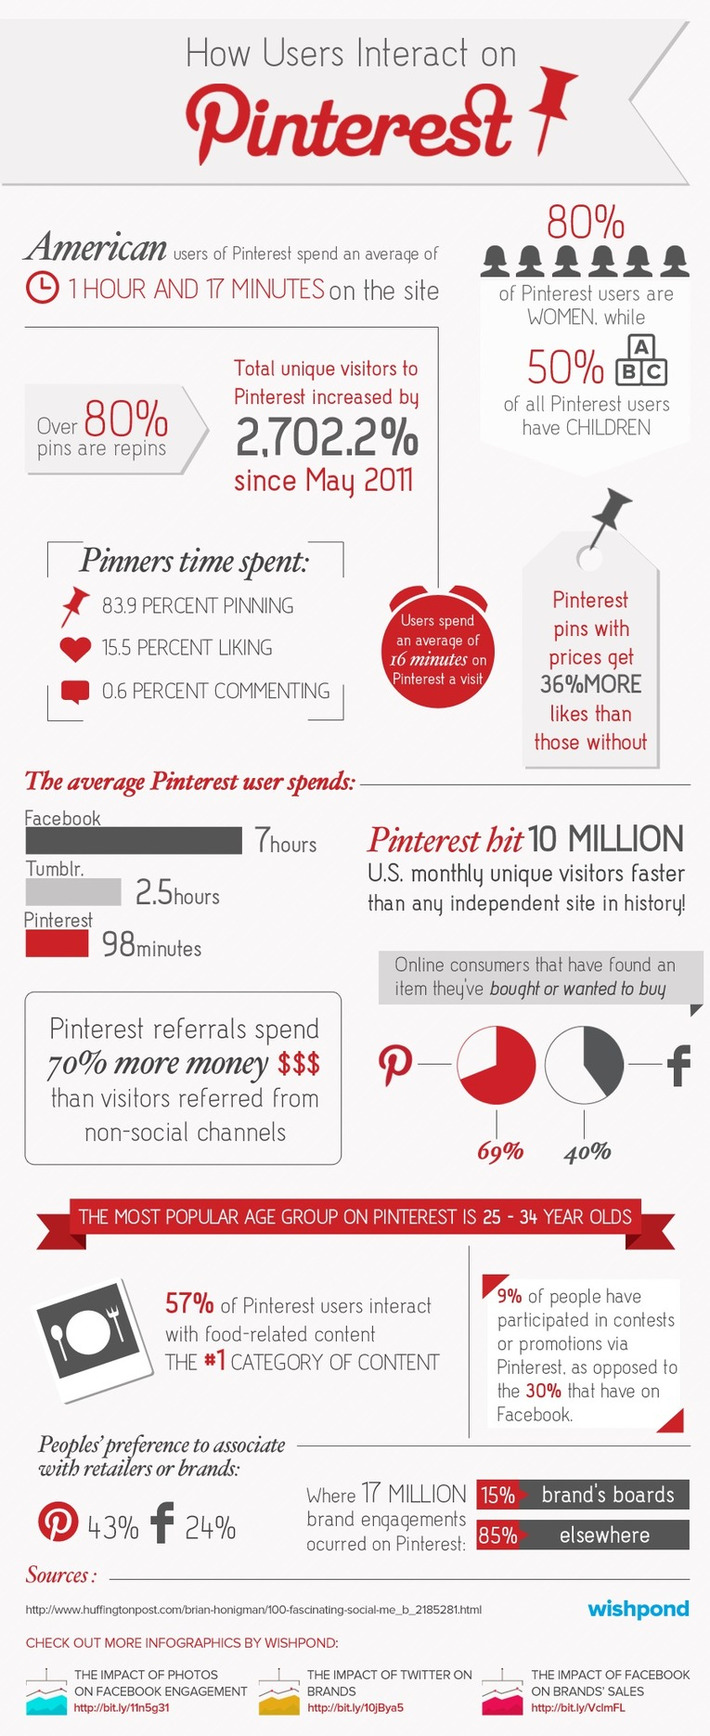 How Users Interact On Pinterest [Wishpond Study] - Social News Daily | A Marketing Mix | Scoop.it